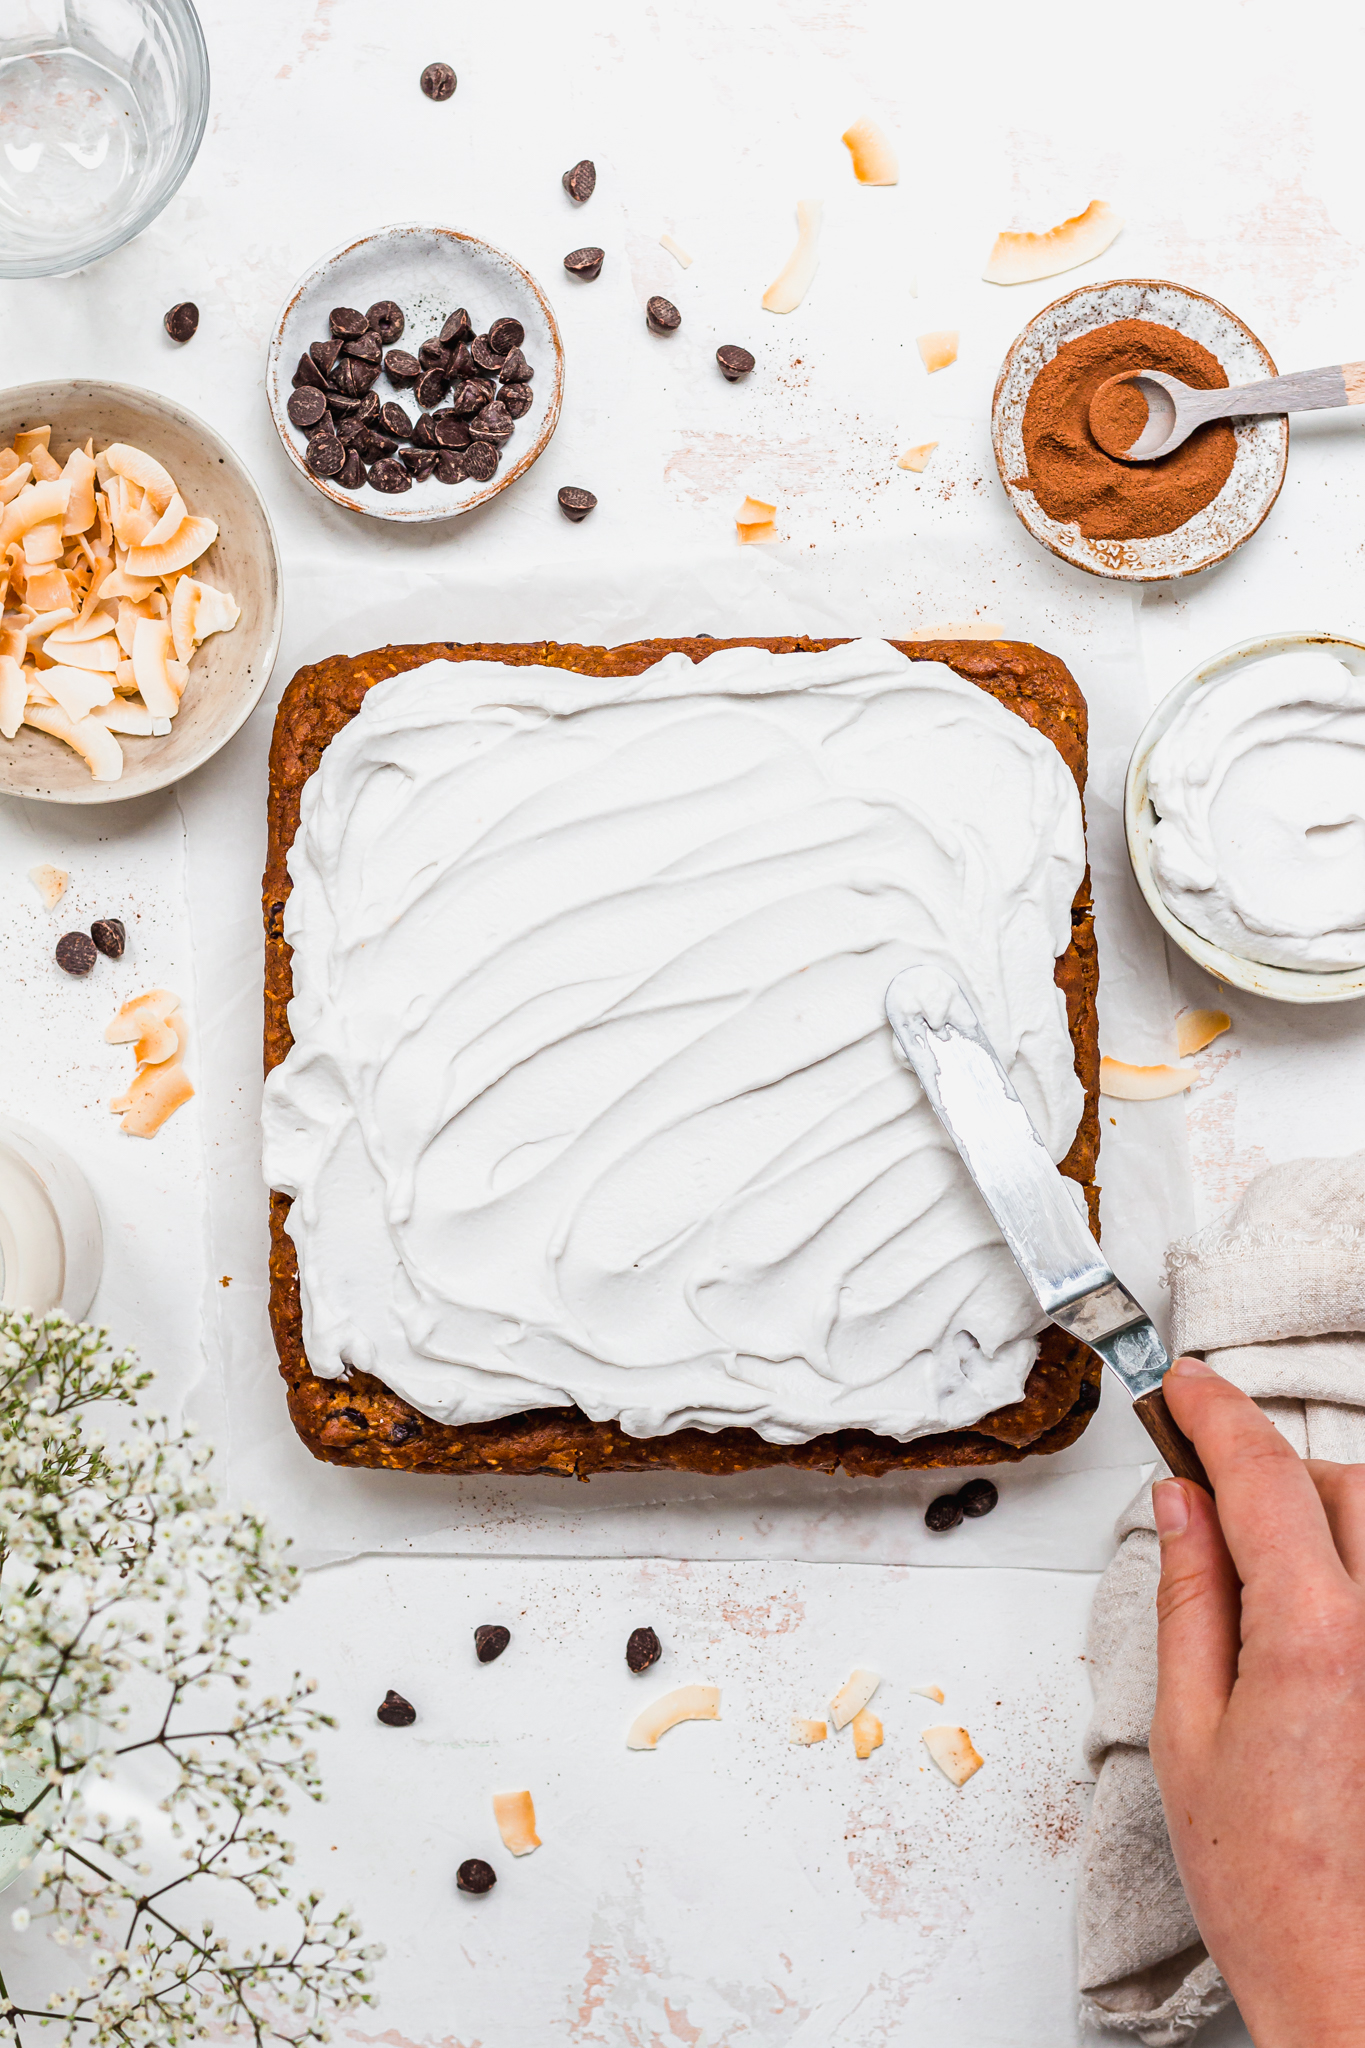 Spreading frosting on a Pumpkin Chocolate Chip and Coconut Cake